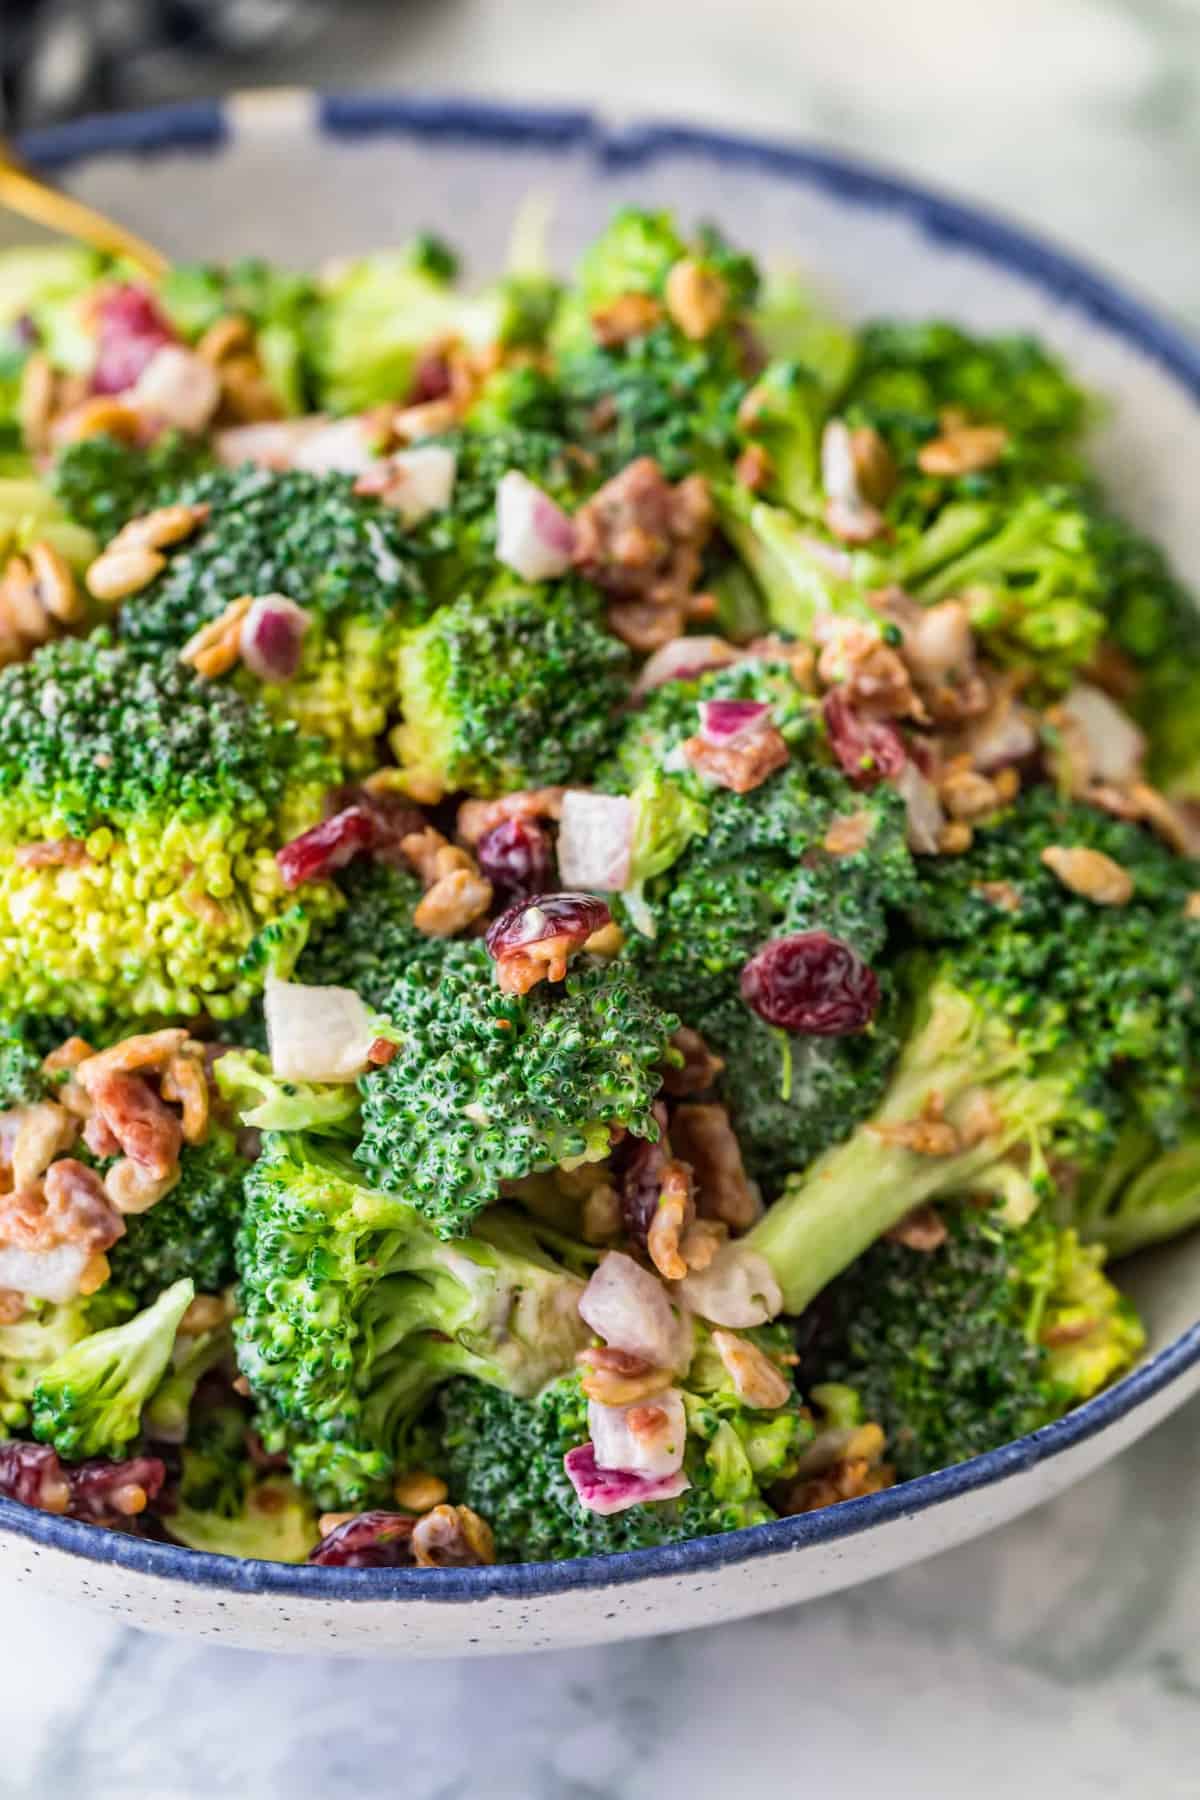 Broccoli salad with bacon and cranberries